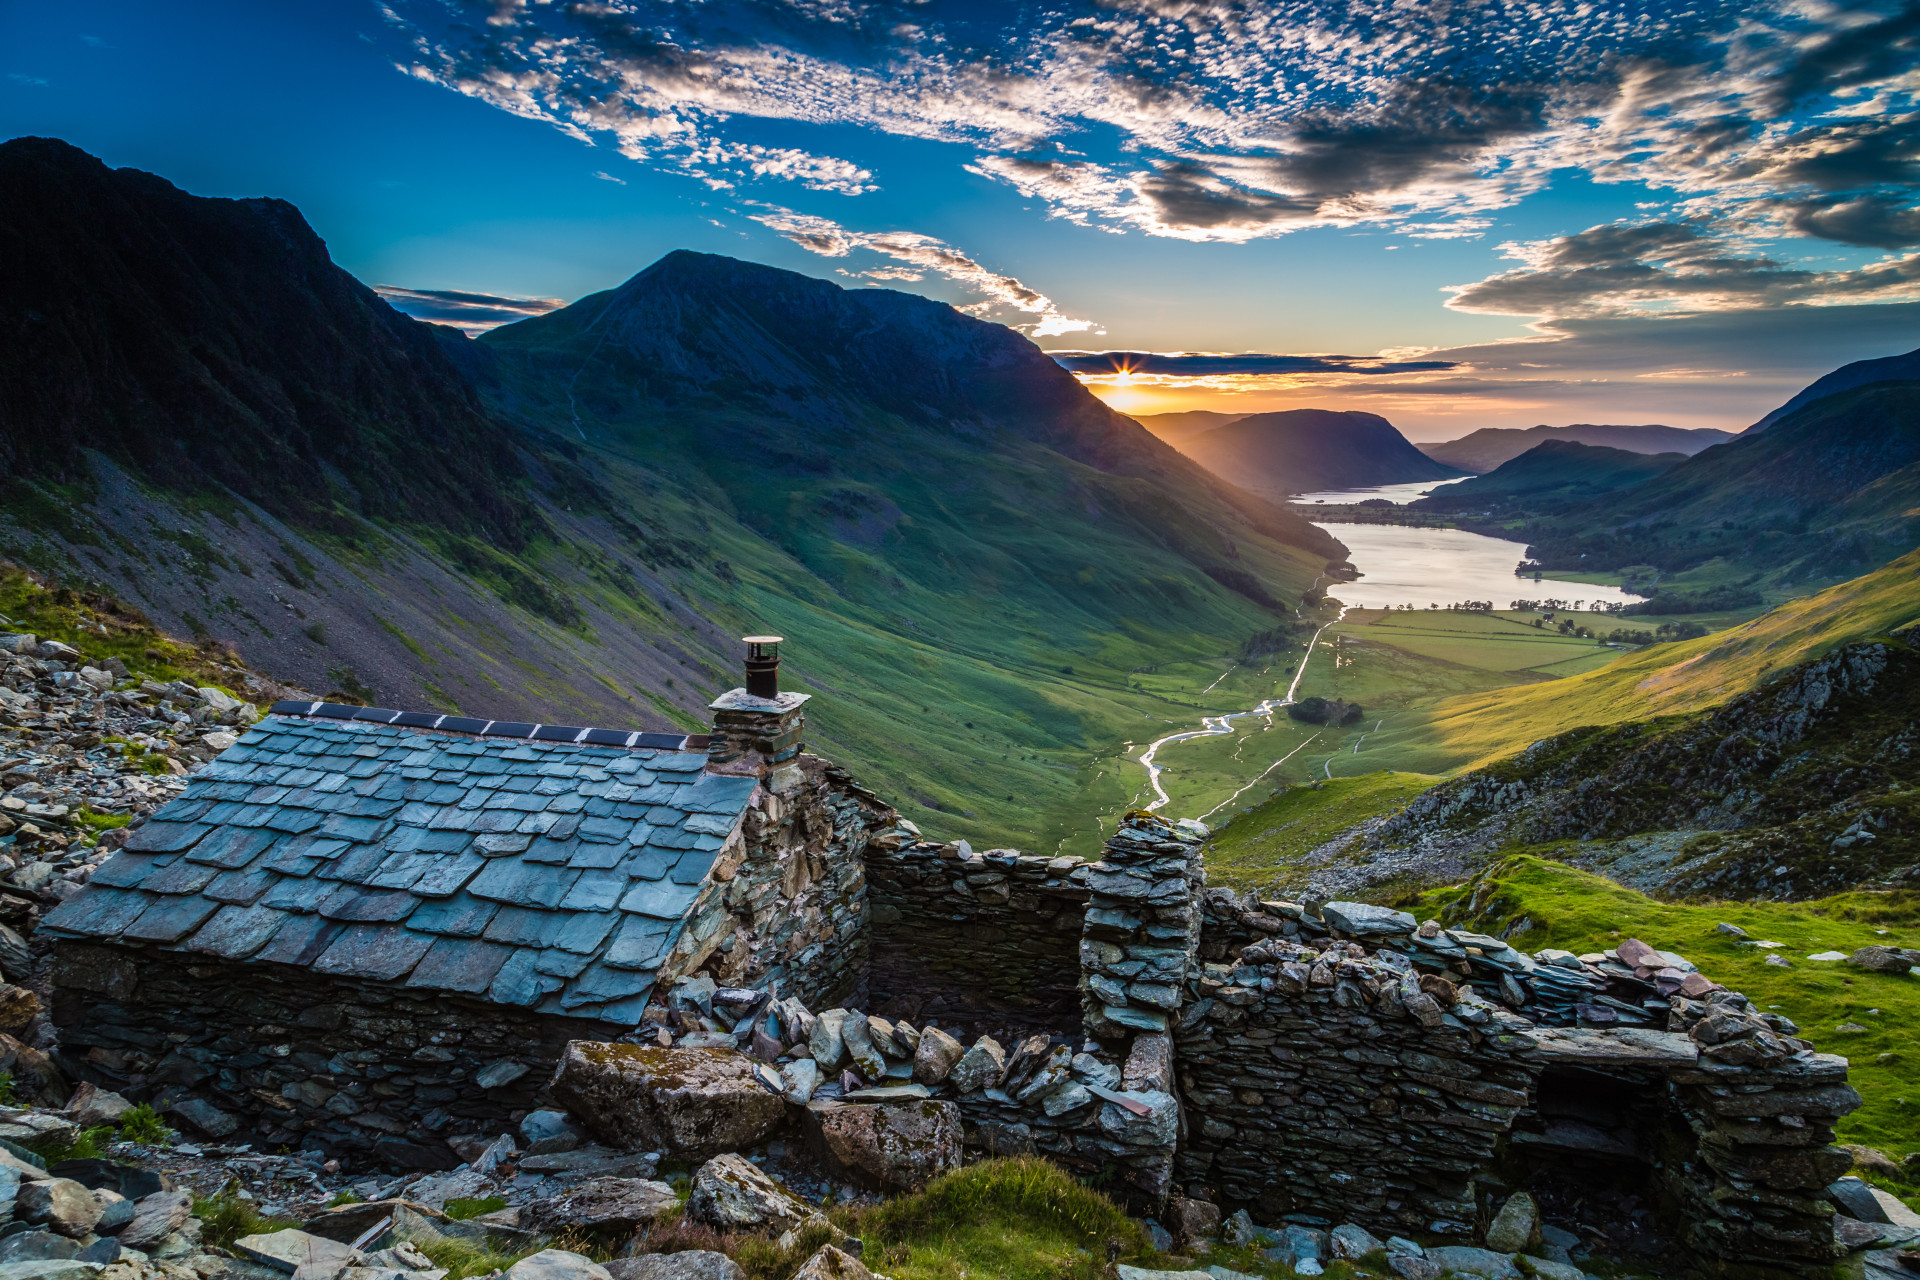 Other key spots are Honister Pass and Crummock Water.<p><a href="https://www.msn.com/en-us/community/channel/vid-7xx8mnucu55yw63we9va2gwr7uihbxwc68fxqp25x6tg4ftibpra?cvid=94631541bc0f4f89bfd59158d696ad7e">Follow us and access great exclusive content every day</a></p>